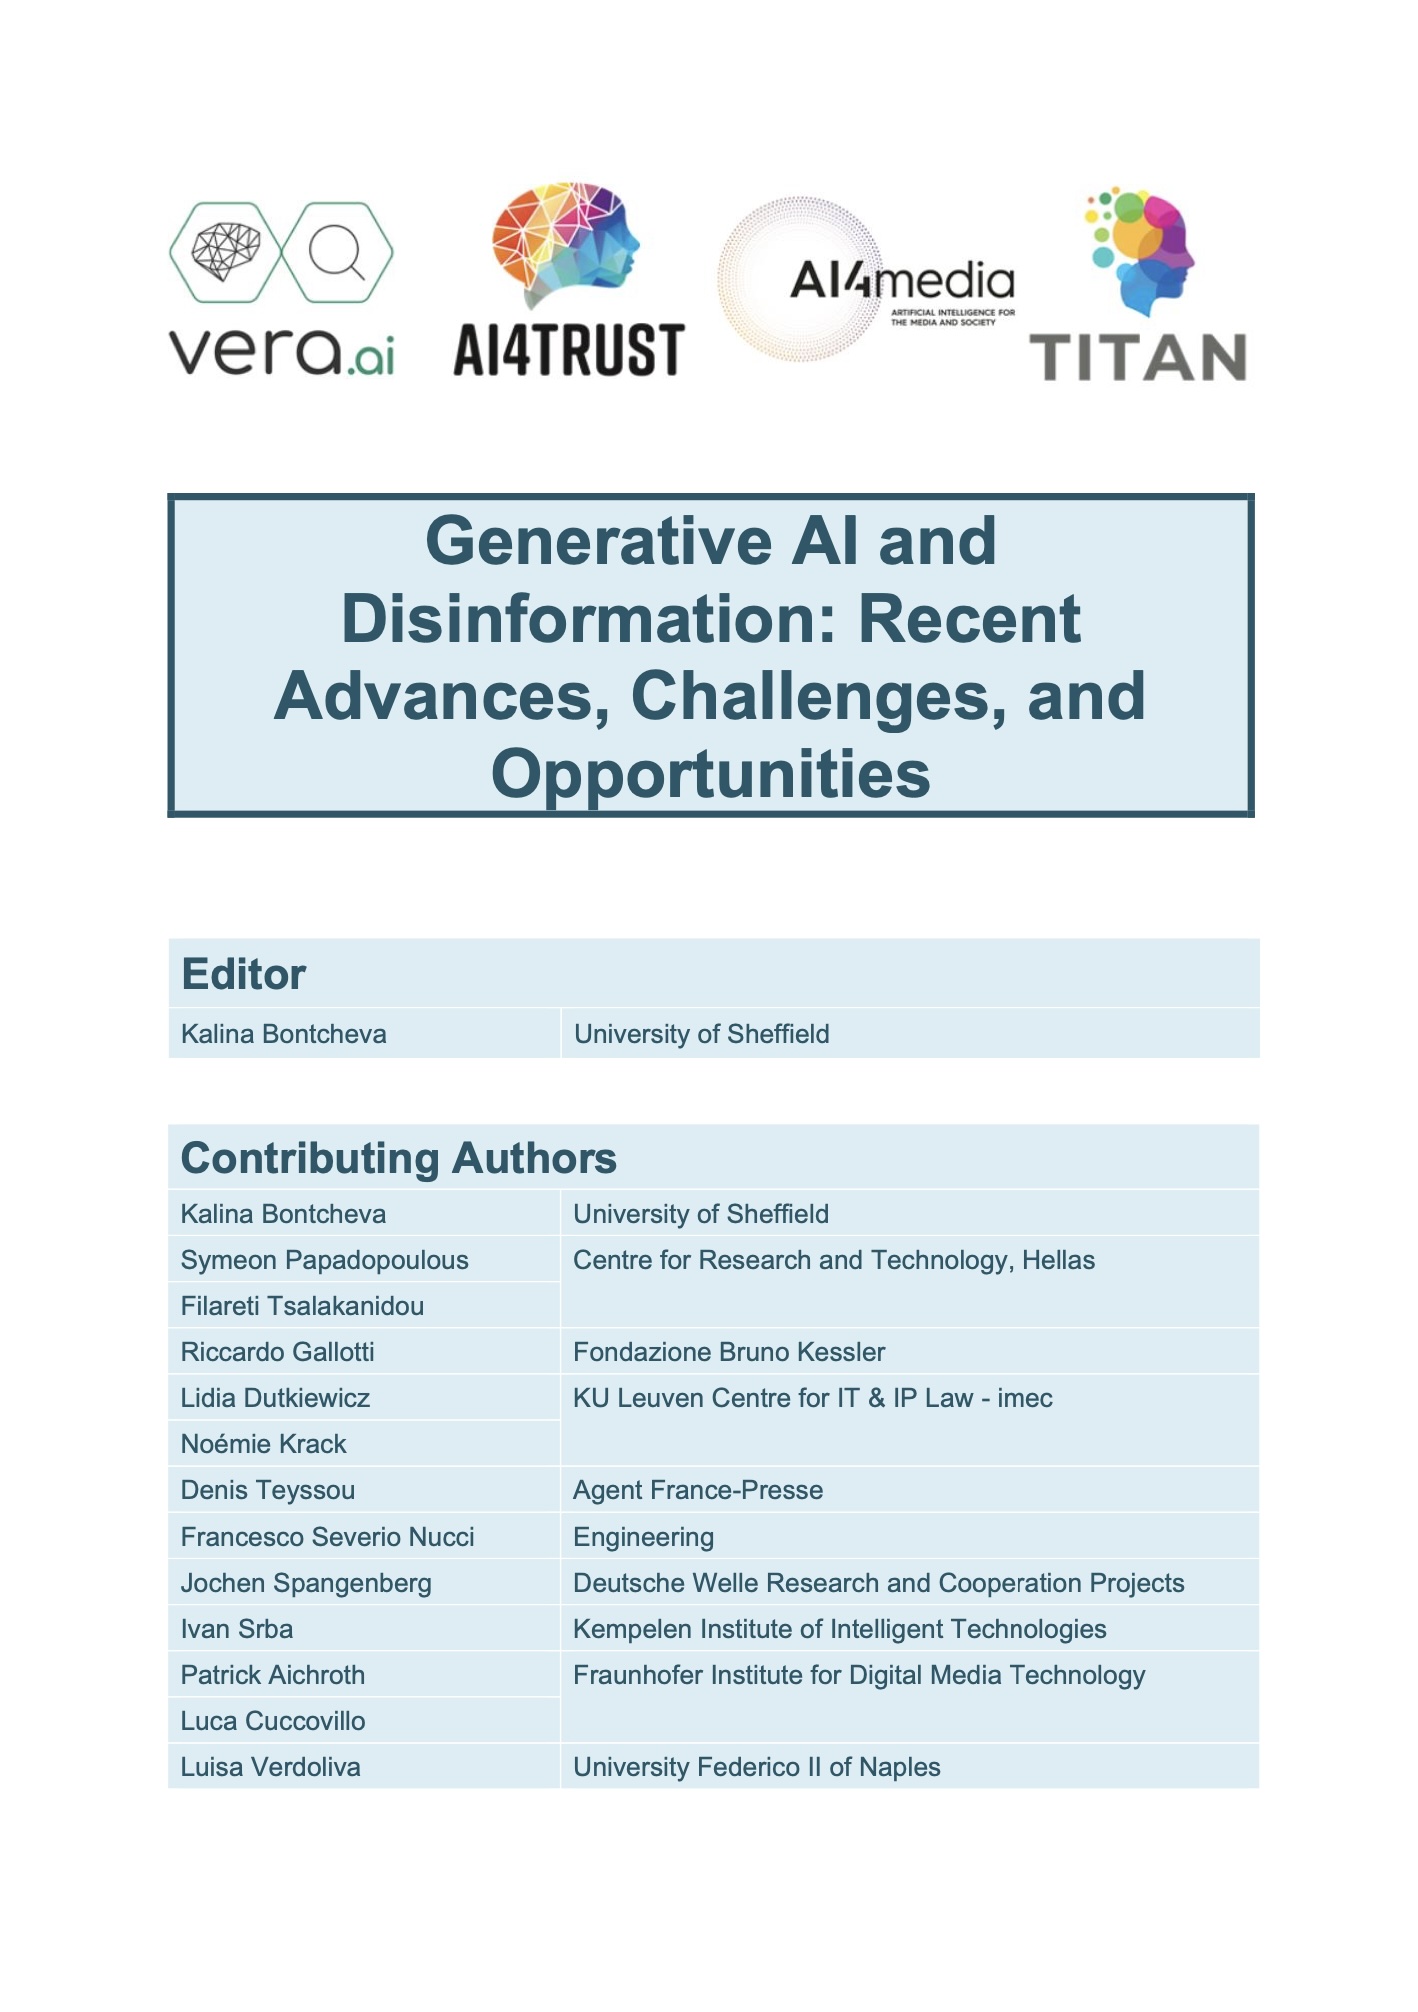 Generative AI and Disinformation: Recent Advances, Challenges, and Opportunities